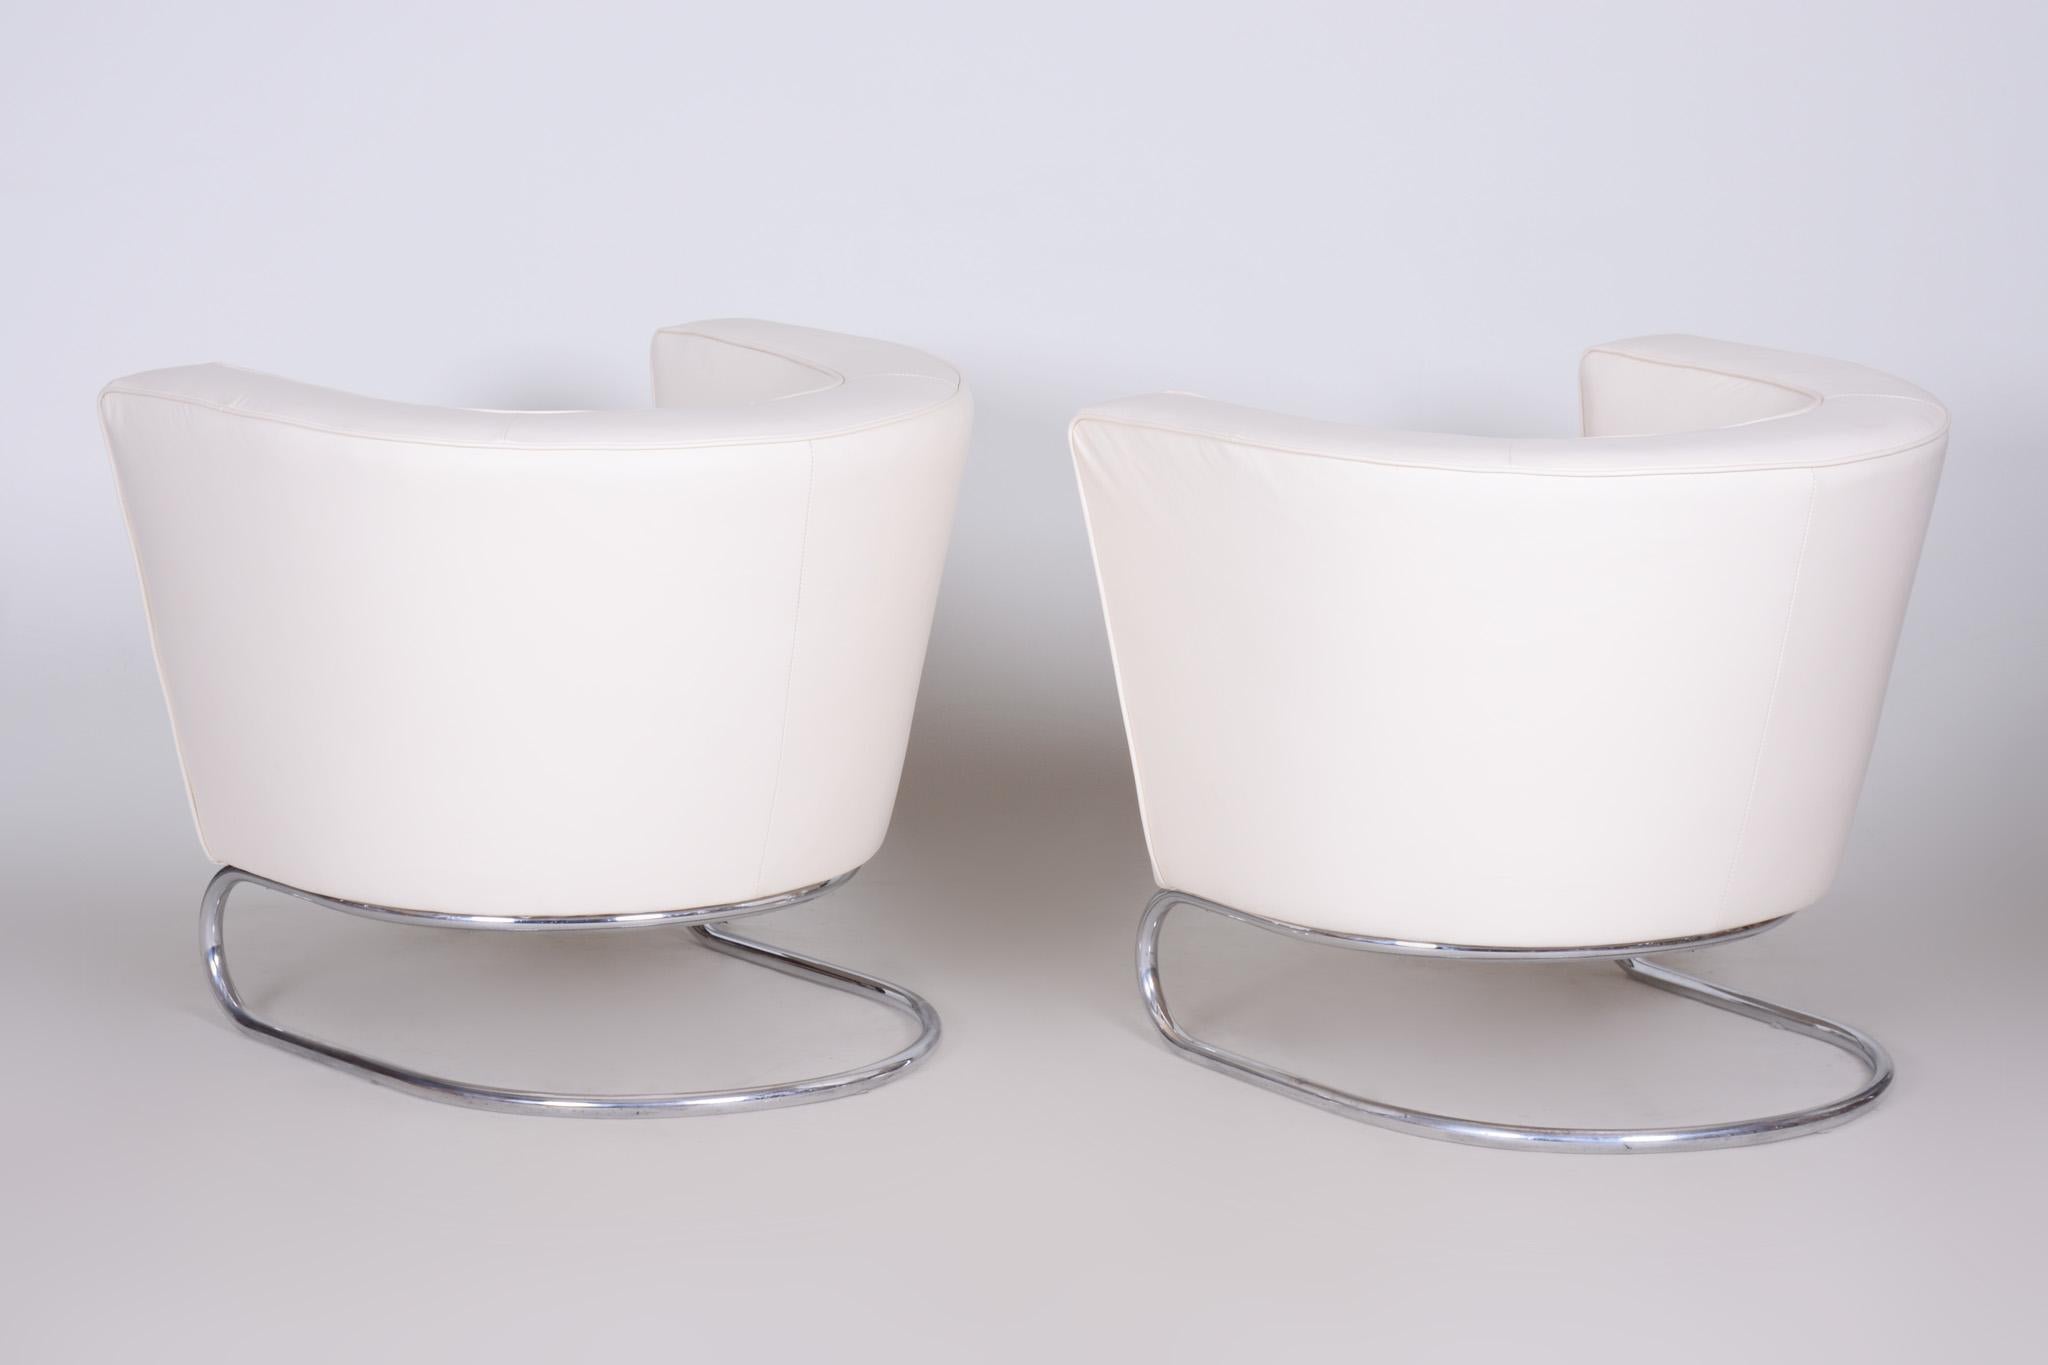 Pair of White Art Deco Armchairs from Czechoslovakia by Jindrich Halabala, 1930s For Sale 9